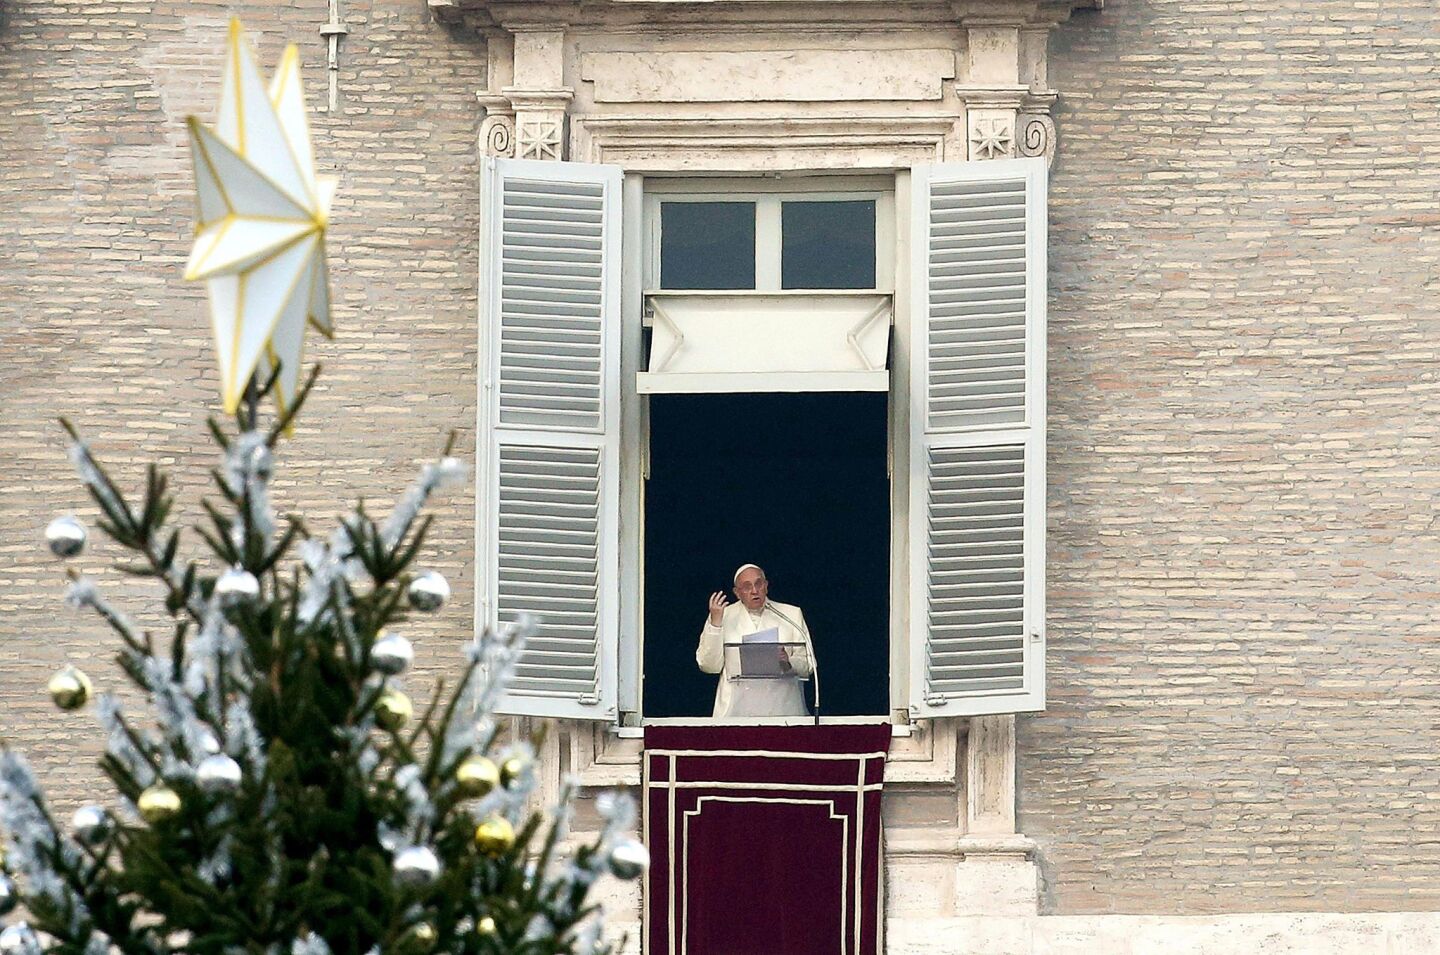 Pope Francis has a front row seat to this Christmas tree in Saint Peter's Square. He looks so close he can almost touch it...